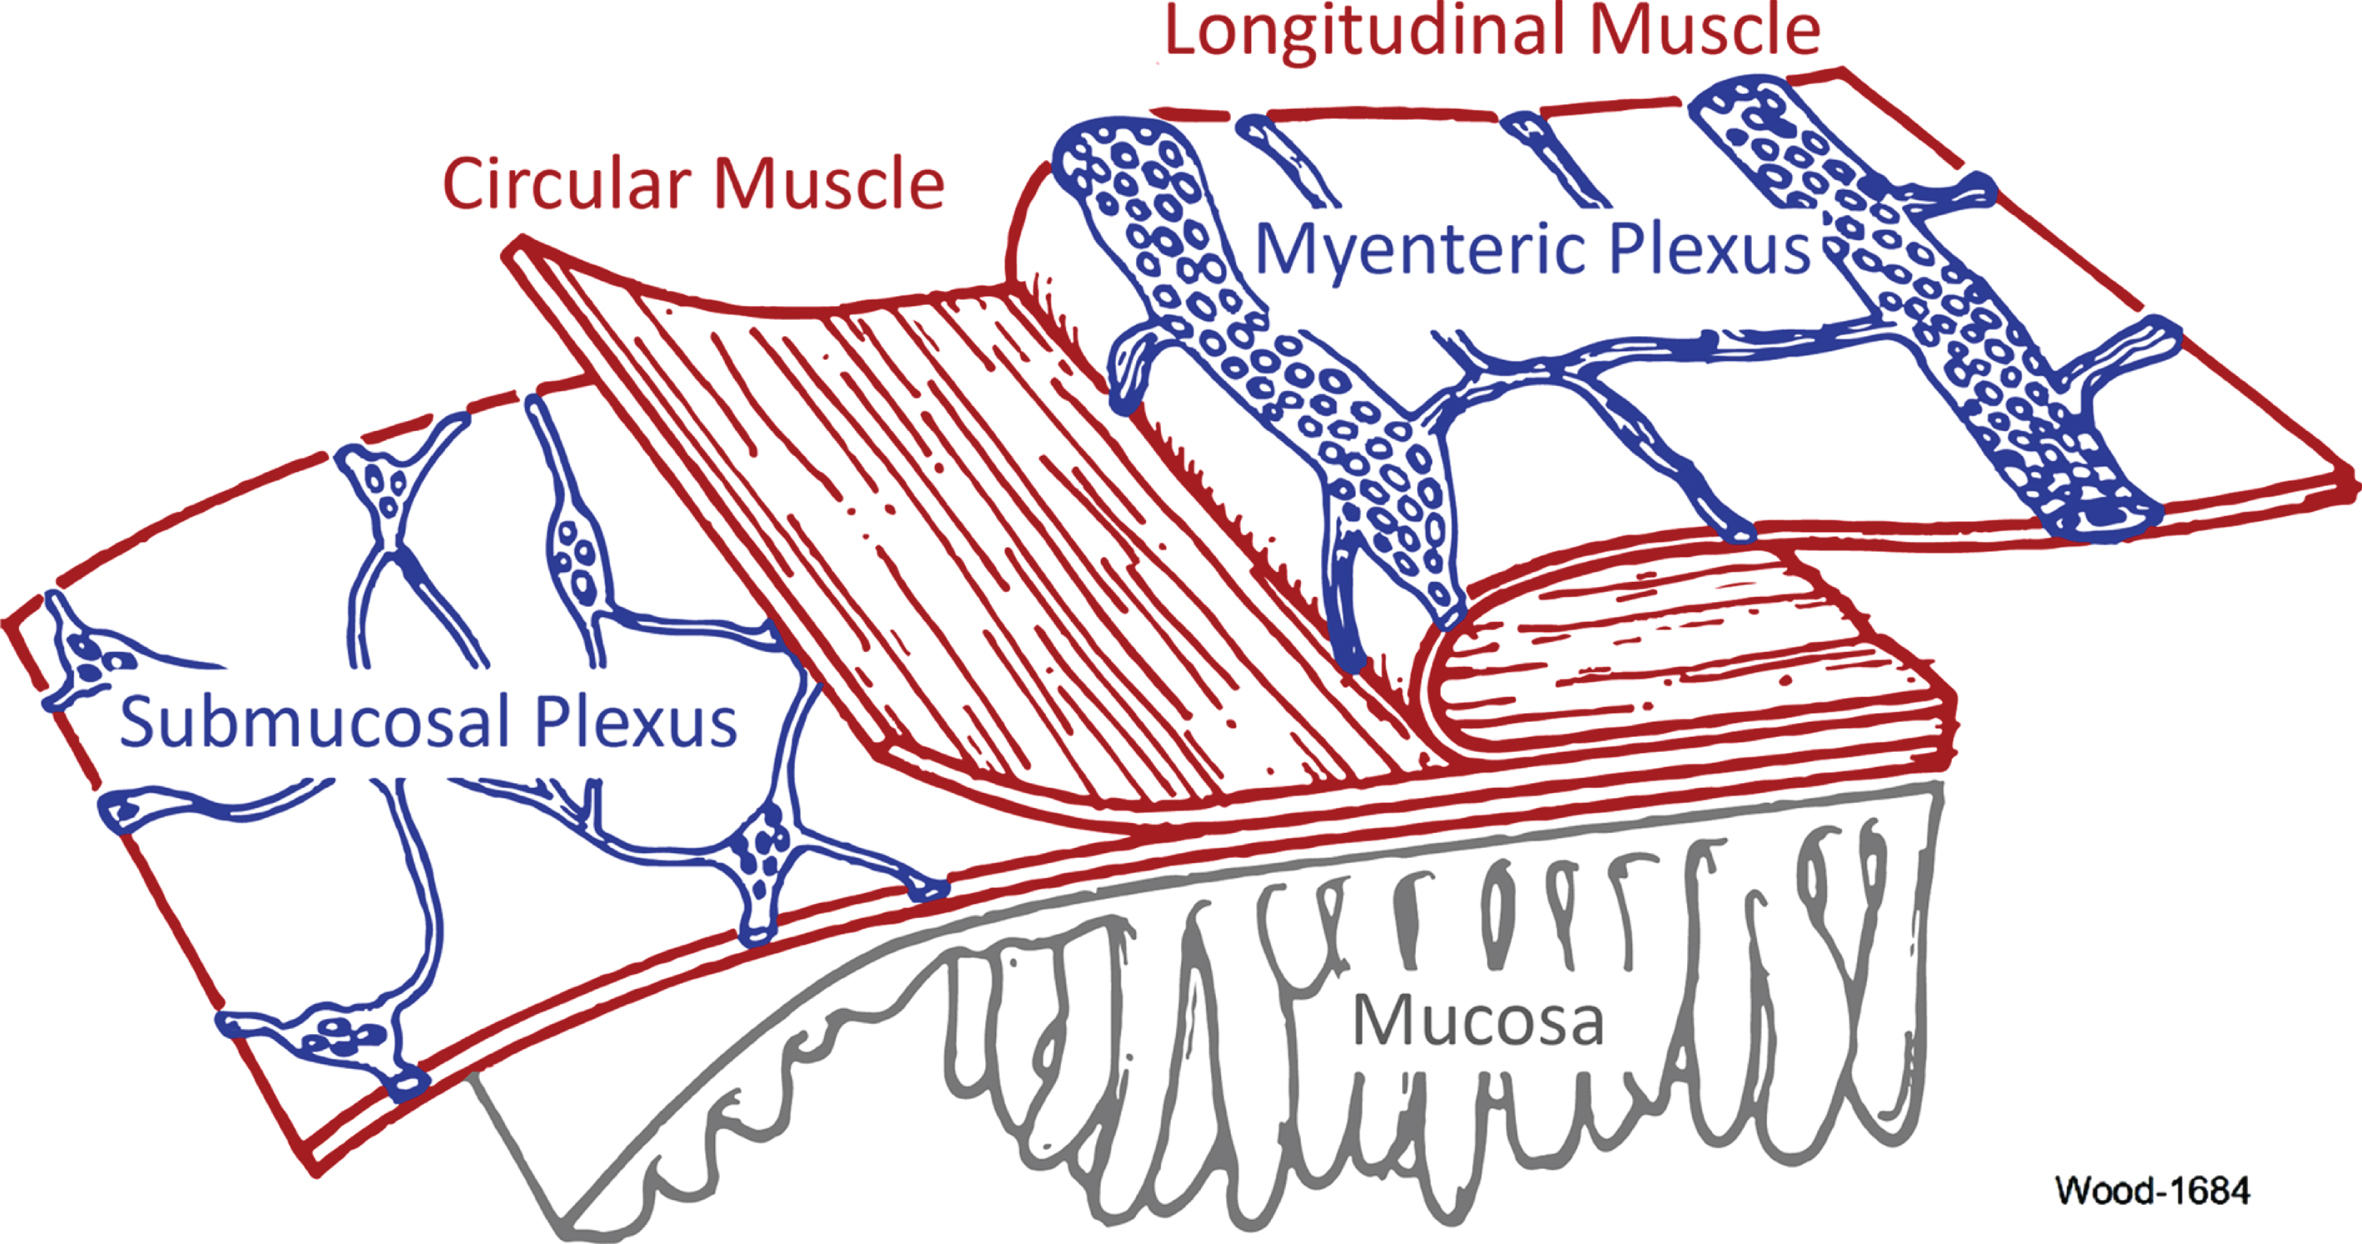 Structure of the intestinal ENS. This simplified representation depicts how the myenteric and submucosal plexuses are arranged within the walls of the small intestine, relative to the longitudinal and circular muscle. The ENS within the large intestine exhibits a near-identical organization [20], but the mucosa is not organized into villi [34]. Reproduced by permission from Morgan & Claypool Publishers and Prof Jackie D. Wood from Enteric Nervous System: The Brain-In-The-Gut by Wood © 2011 Morgan & Claypool Life Sciences [33].